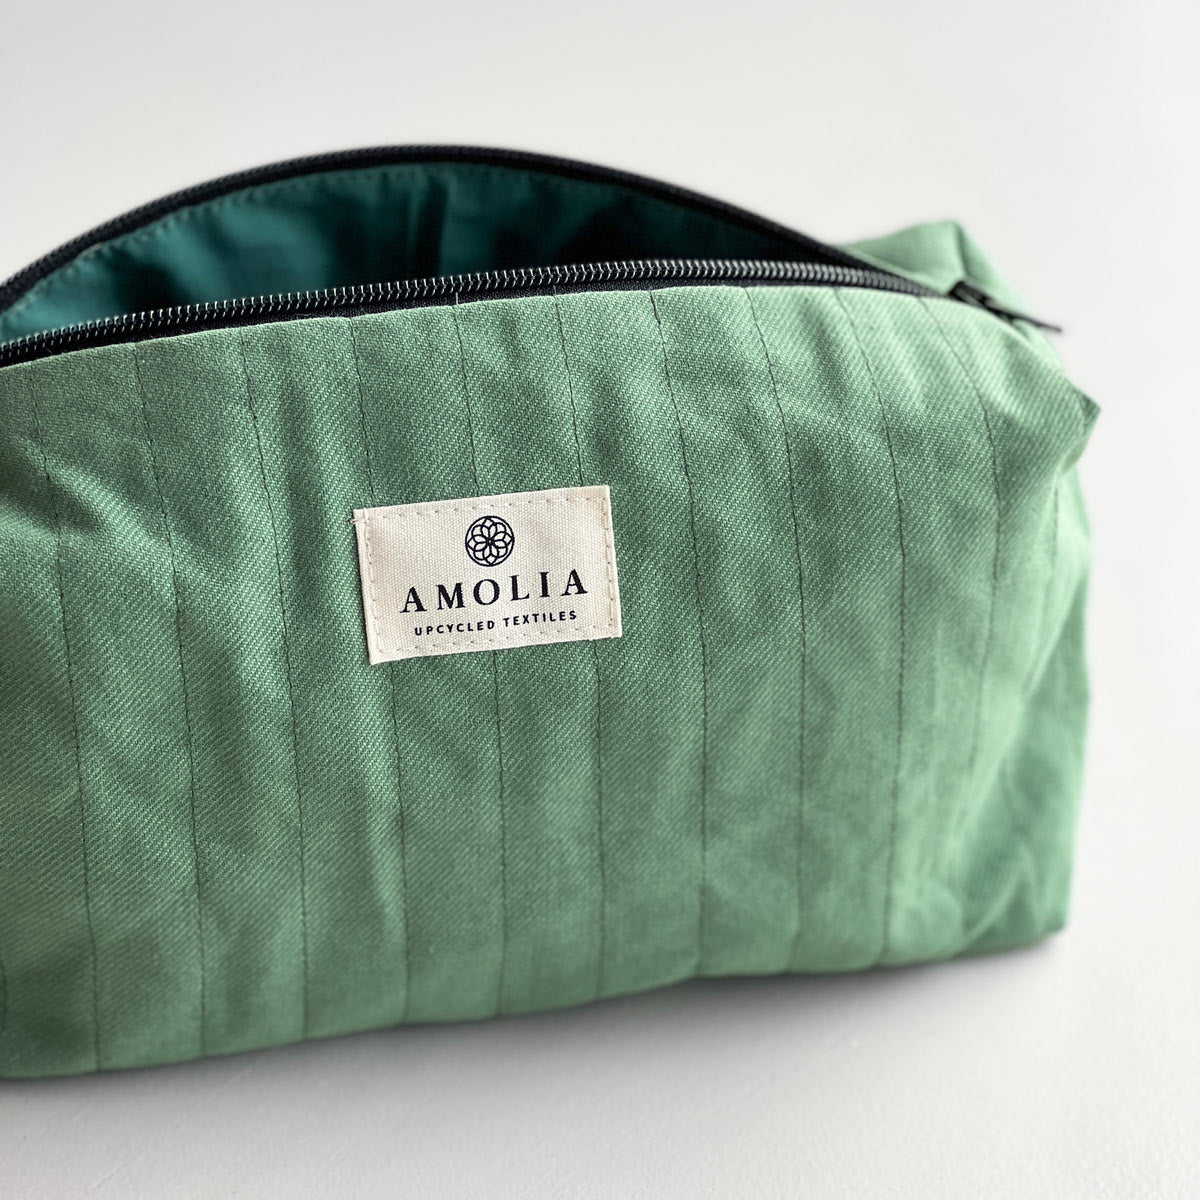 Upcycled toiletry bag, small, green